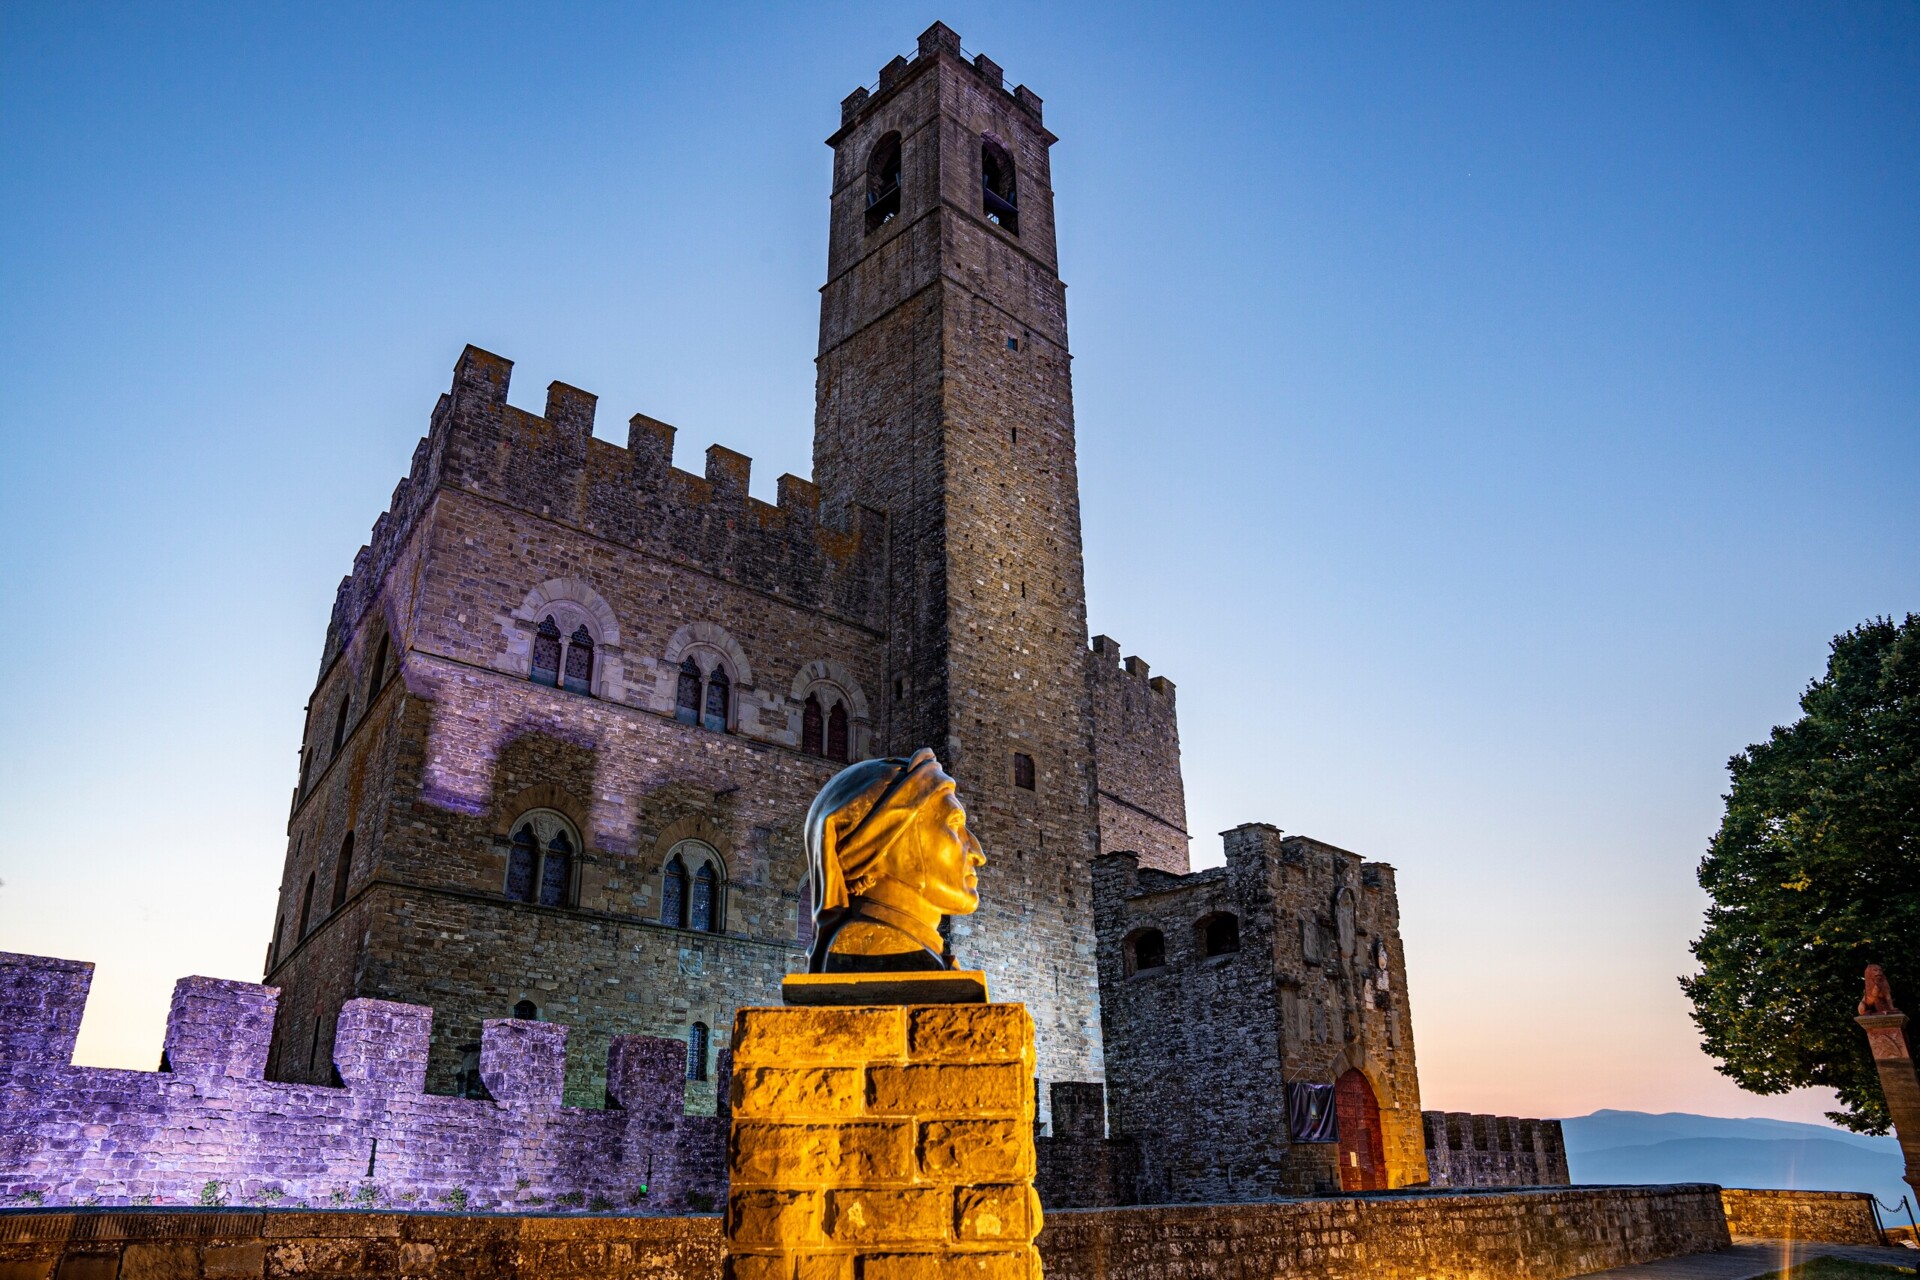 The castle of the Guidi Counts and the monument to Dante Alighieri